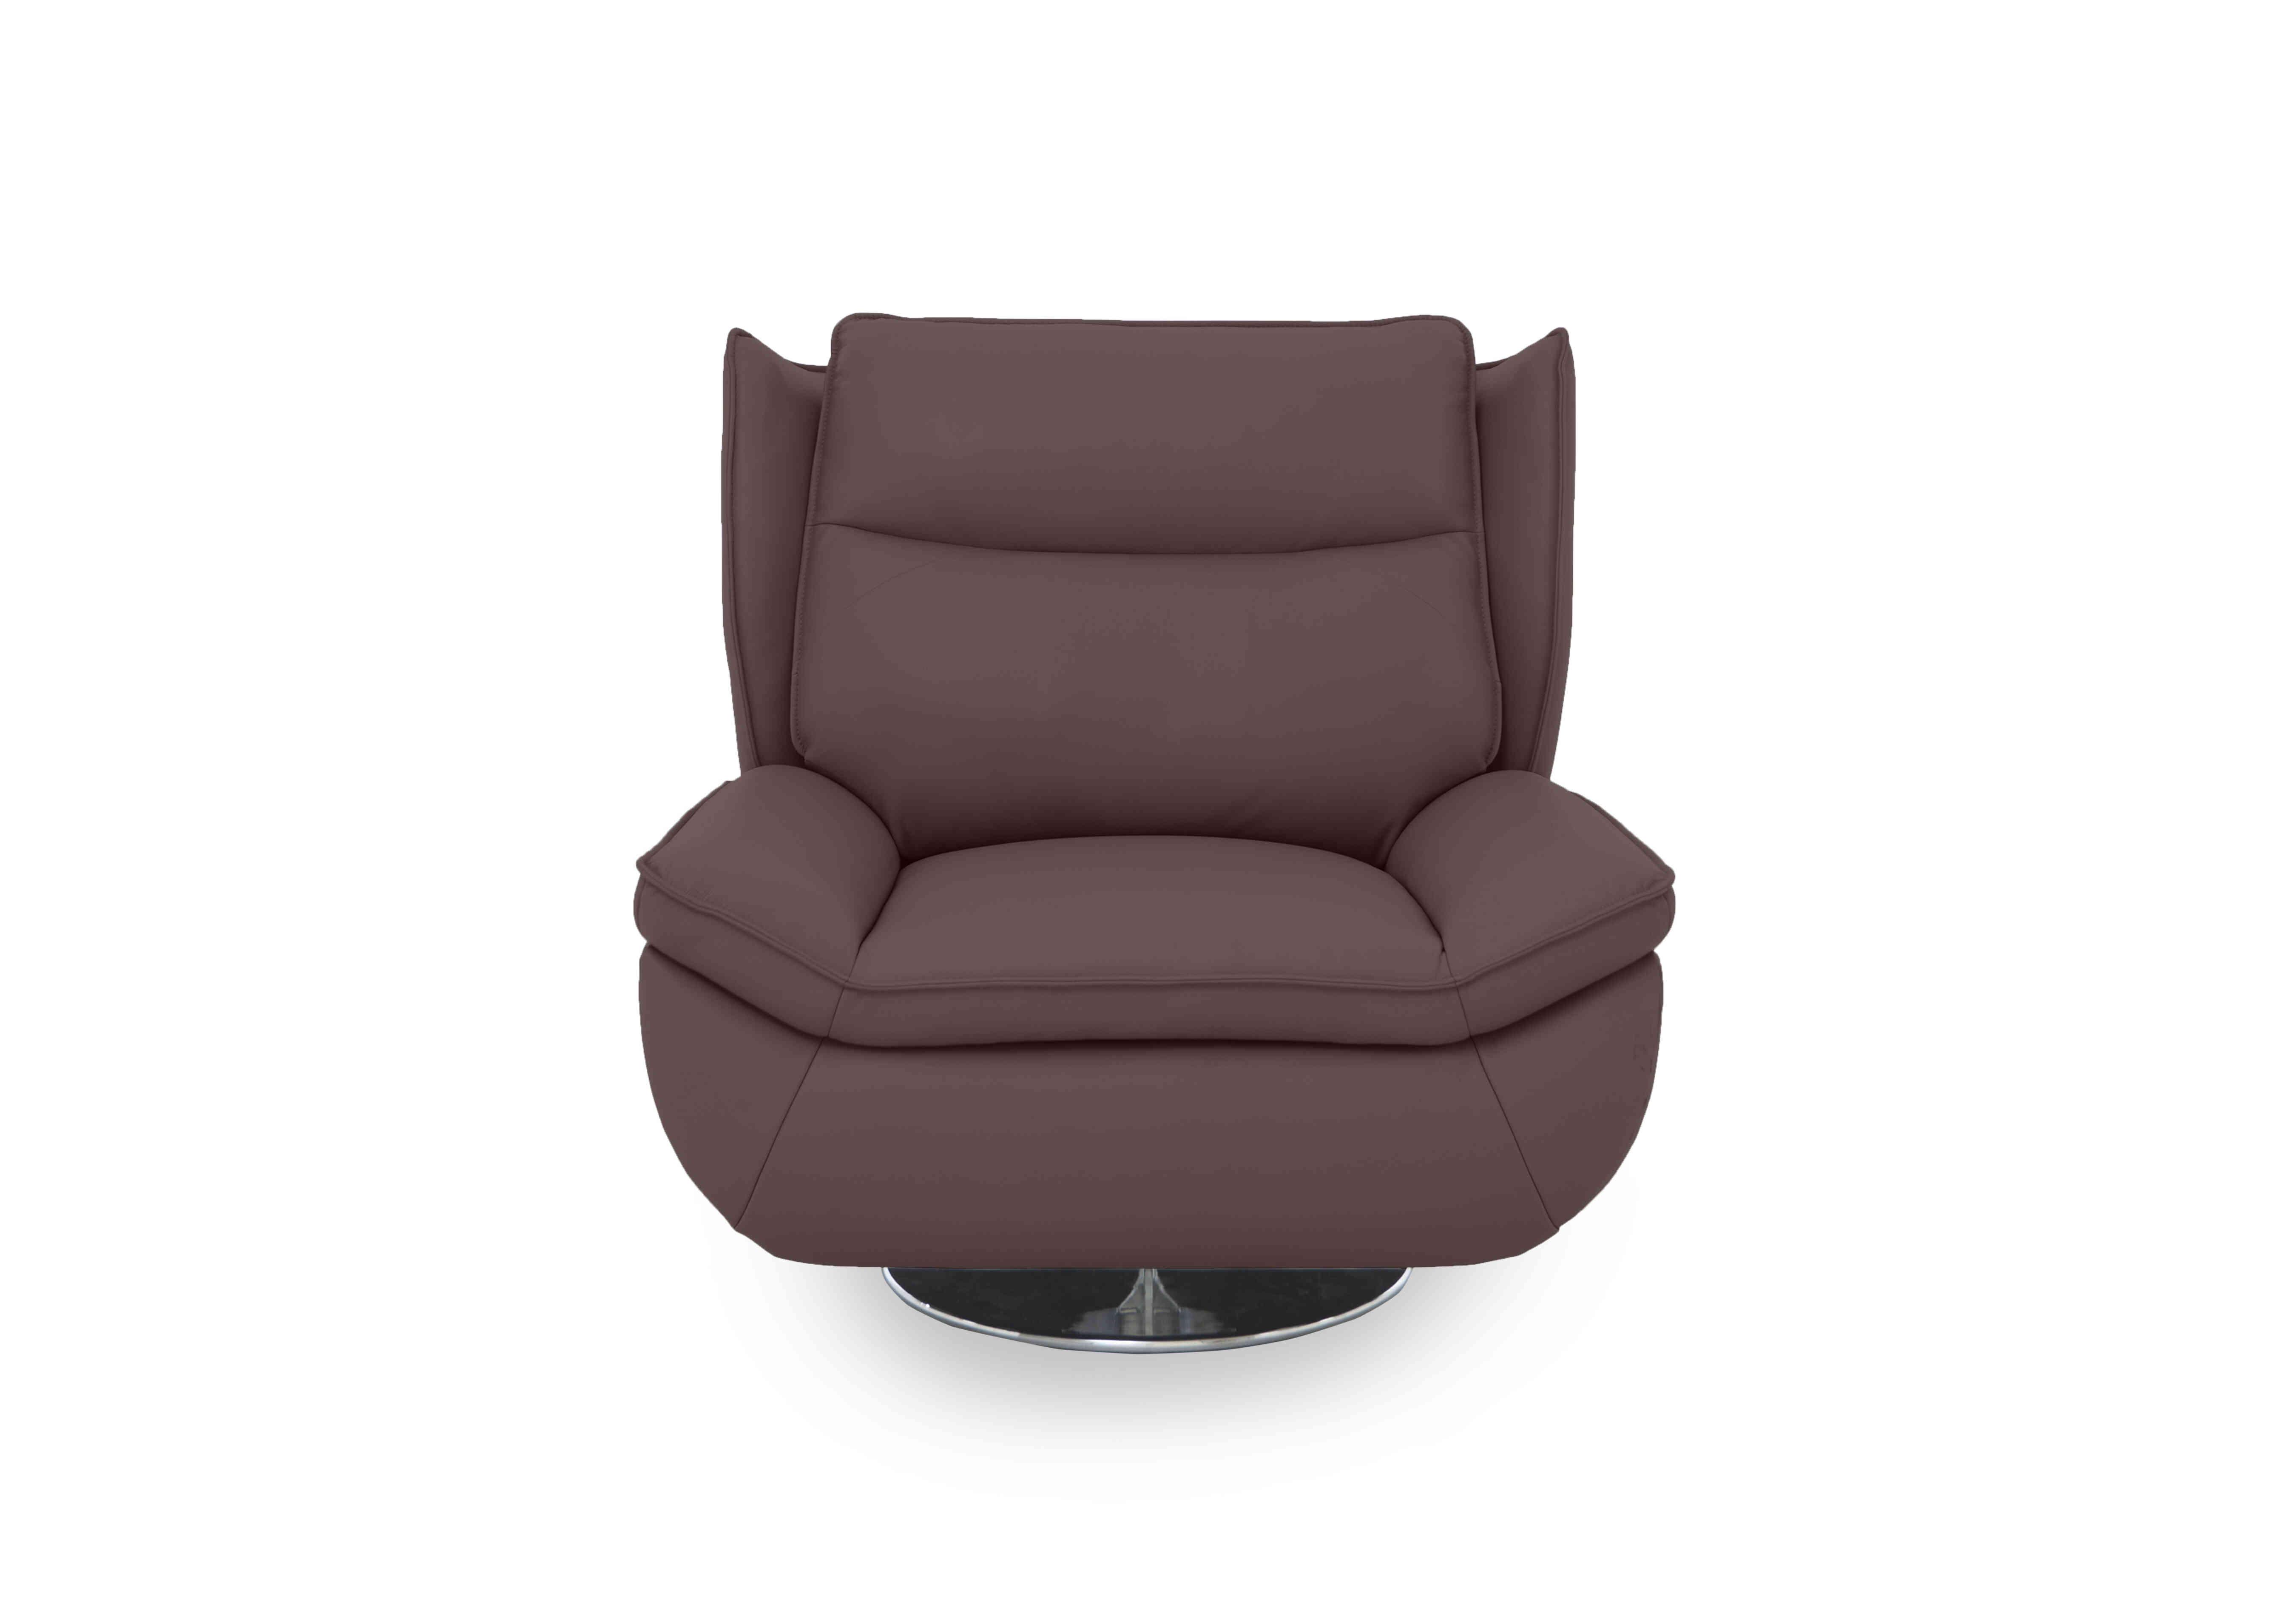 Vinny Leather Swivel Chair in Cat-40/30 Oslo Mulberry on Furniture Village